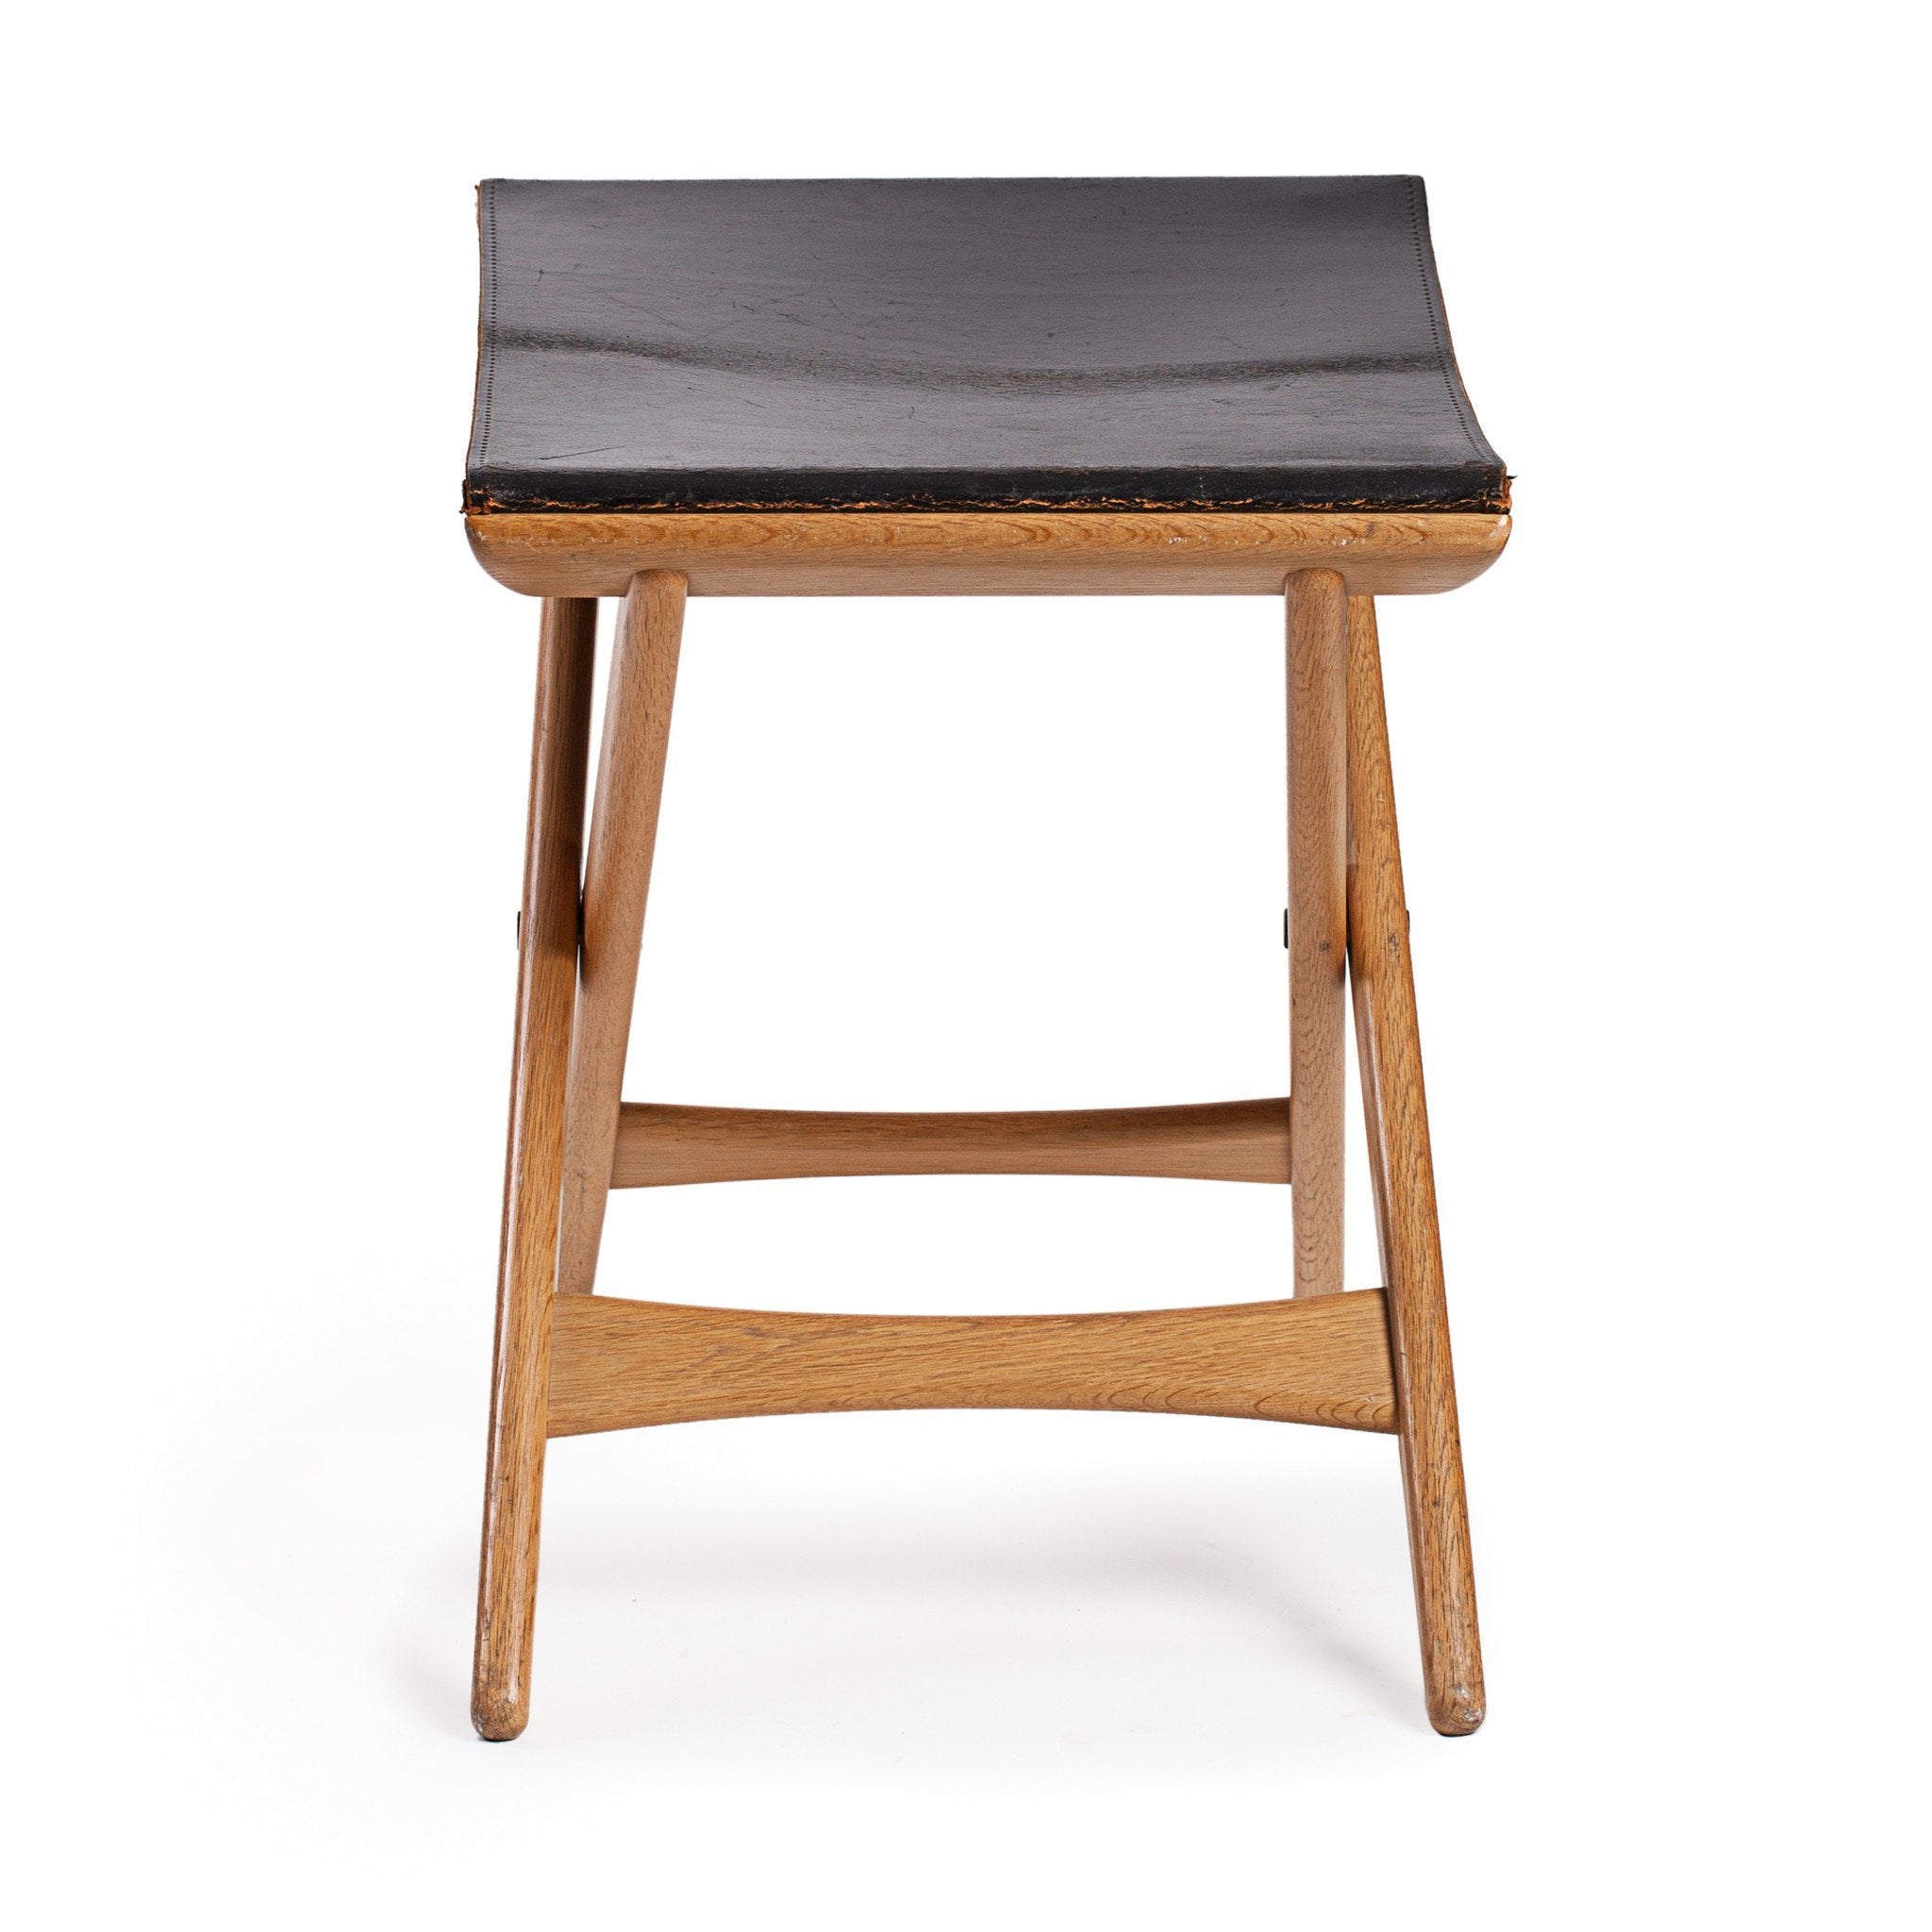 Pair of Folding Stools by Uno and Östen Christiansson - ONEROOM